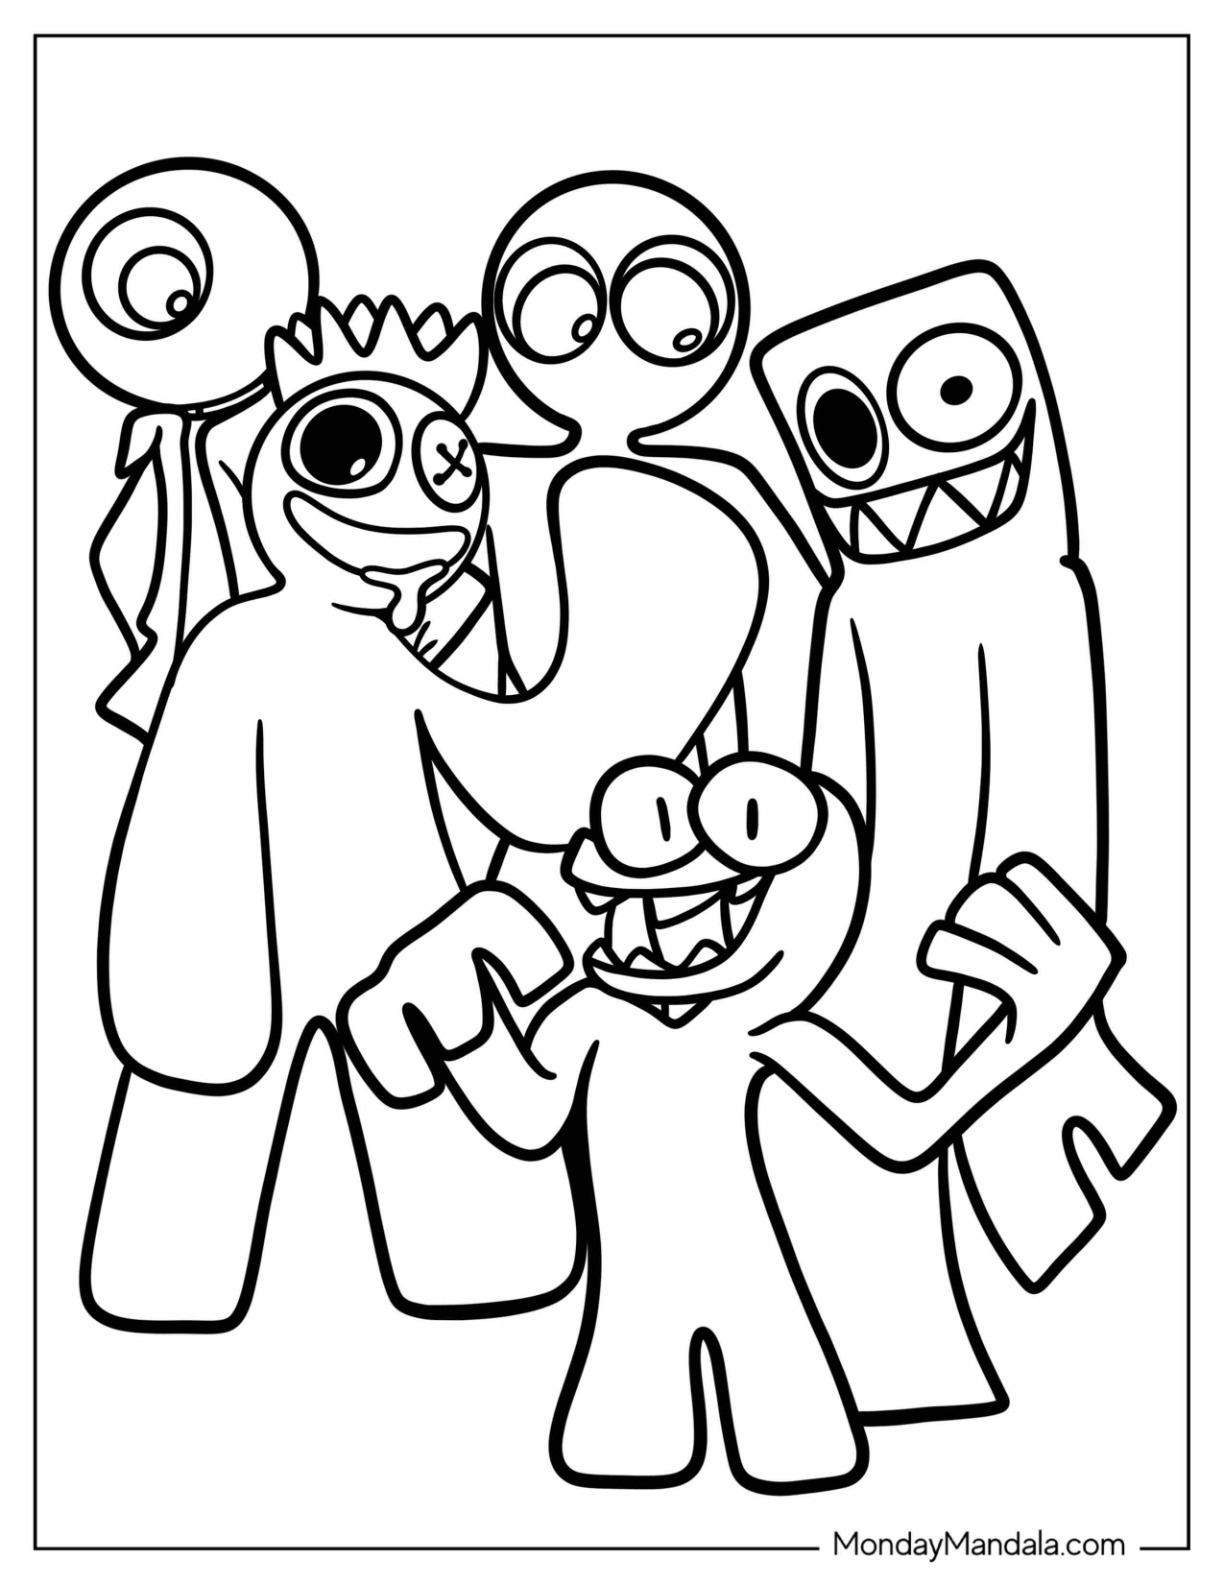 Rainbow friends coloring pages free pdf printables